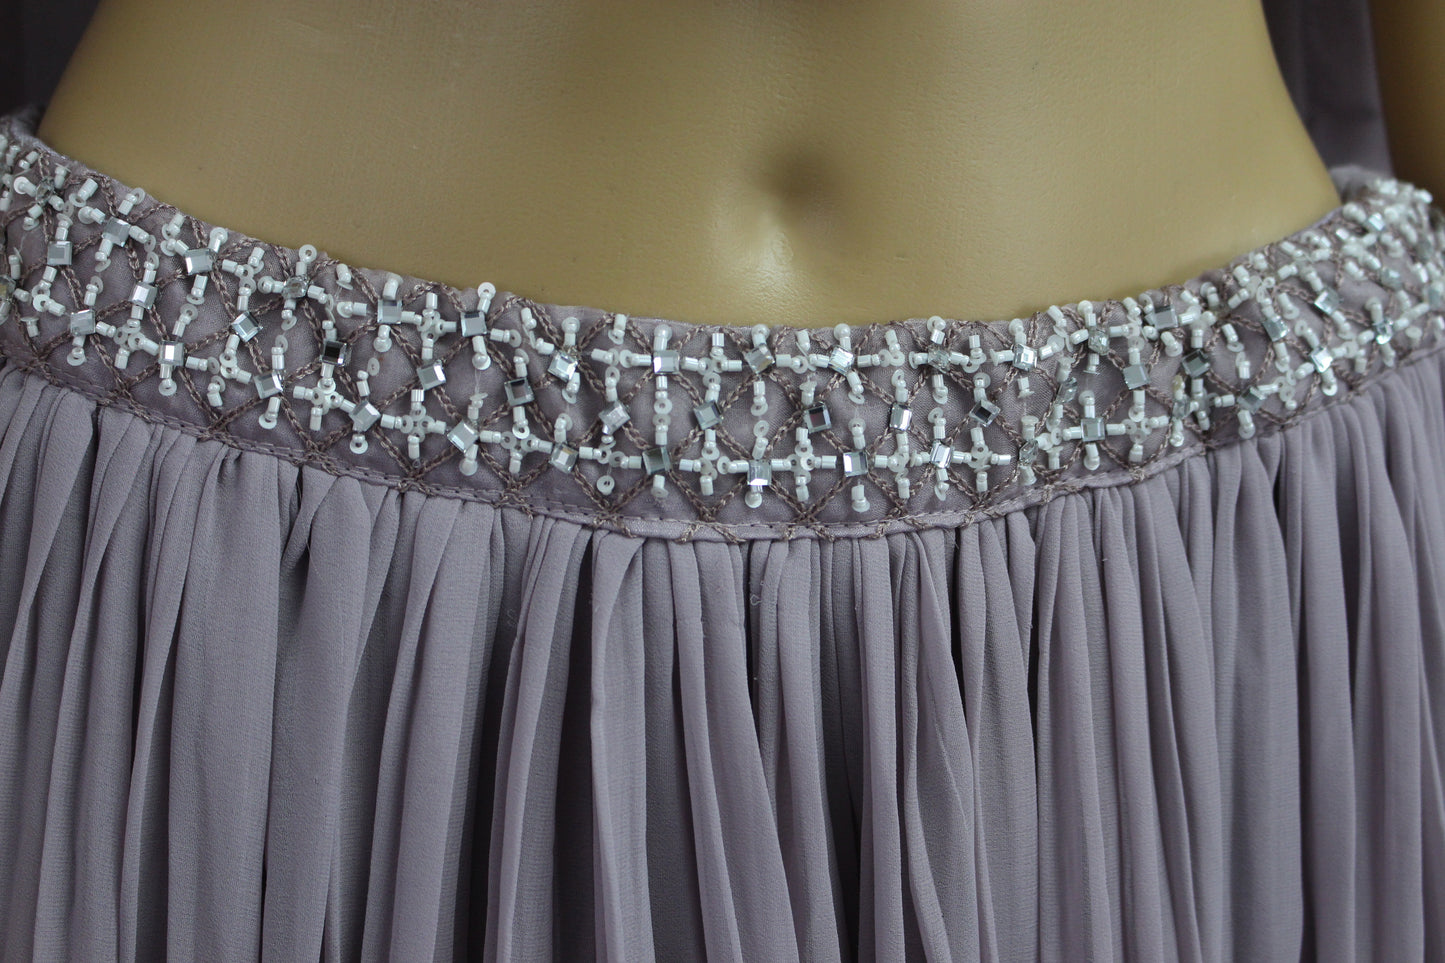 Mauve Shaded Handworked Fusion Crop Top with Exquisite Georgette Skirt